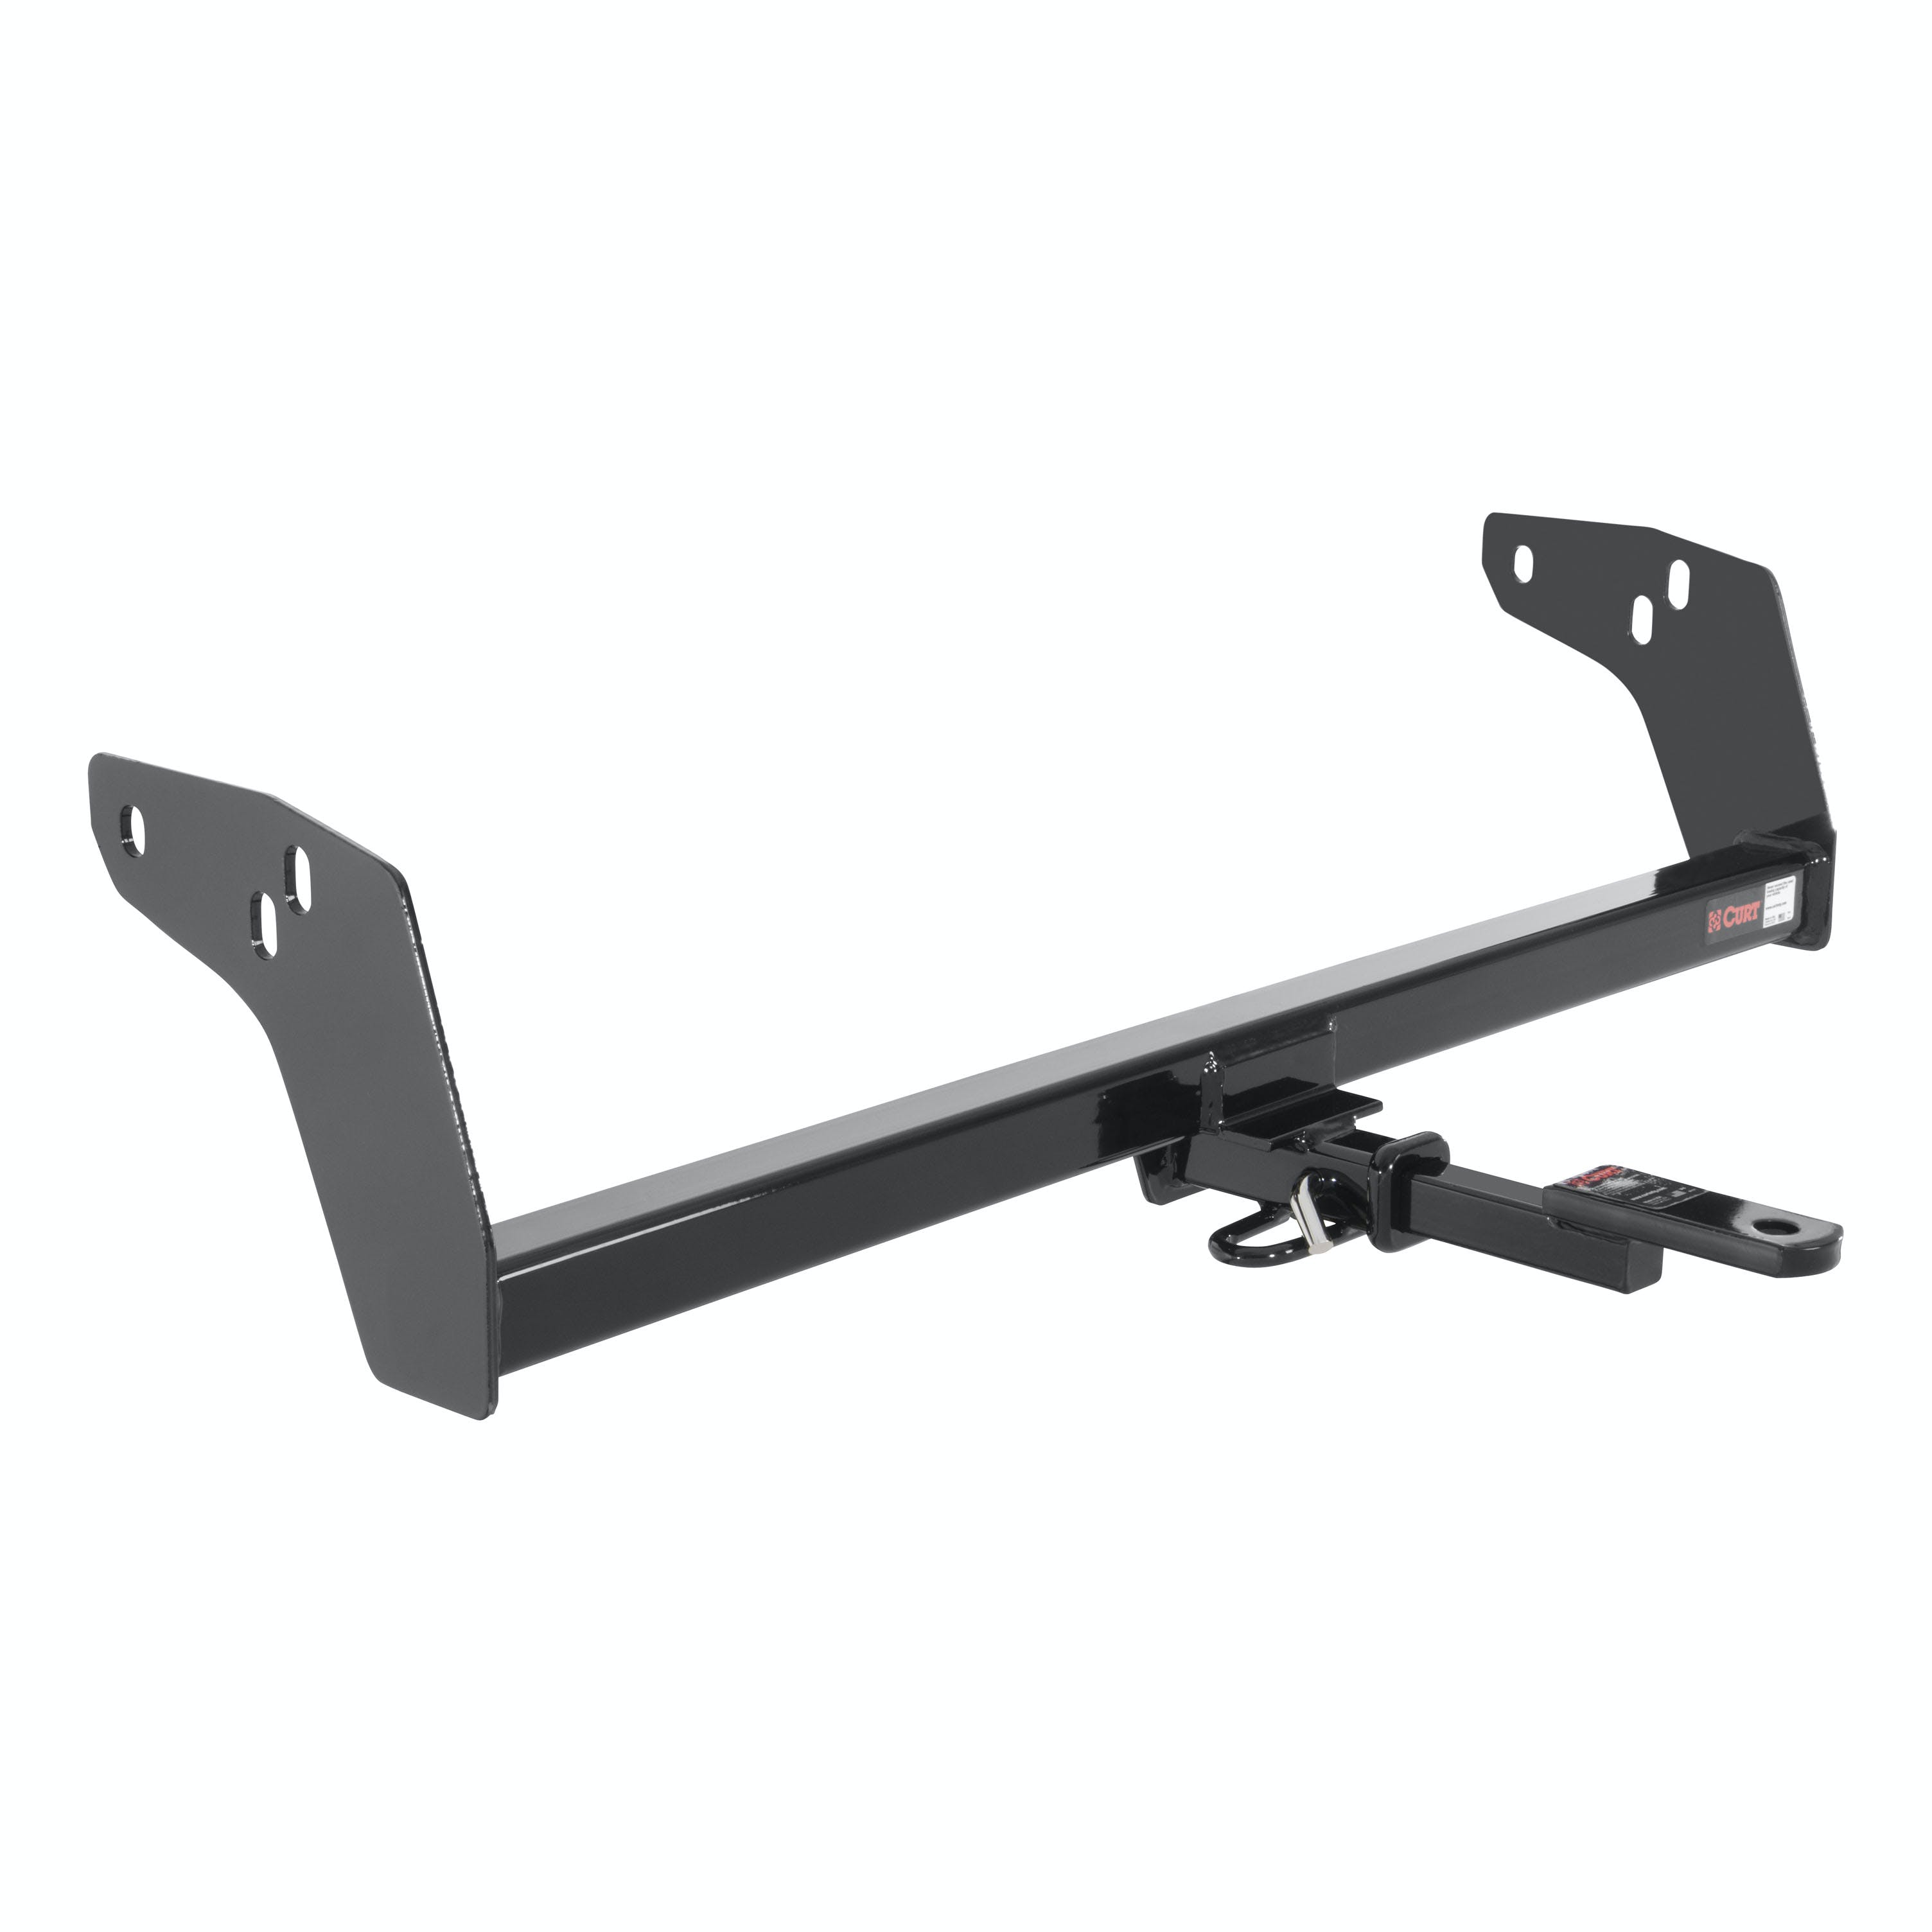 CURT 120113 Class 2 Trailer Hitch, 1-1/4 Ball Mount, Select Chevrolet S10, GMC S15, Sonoma